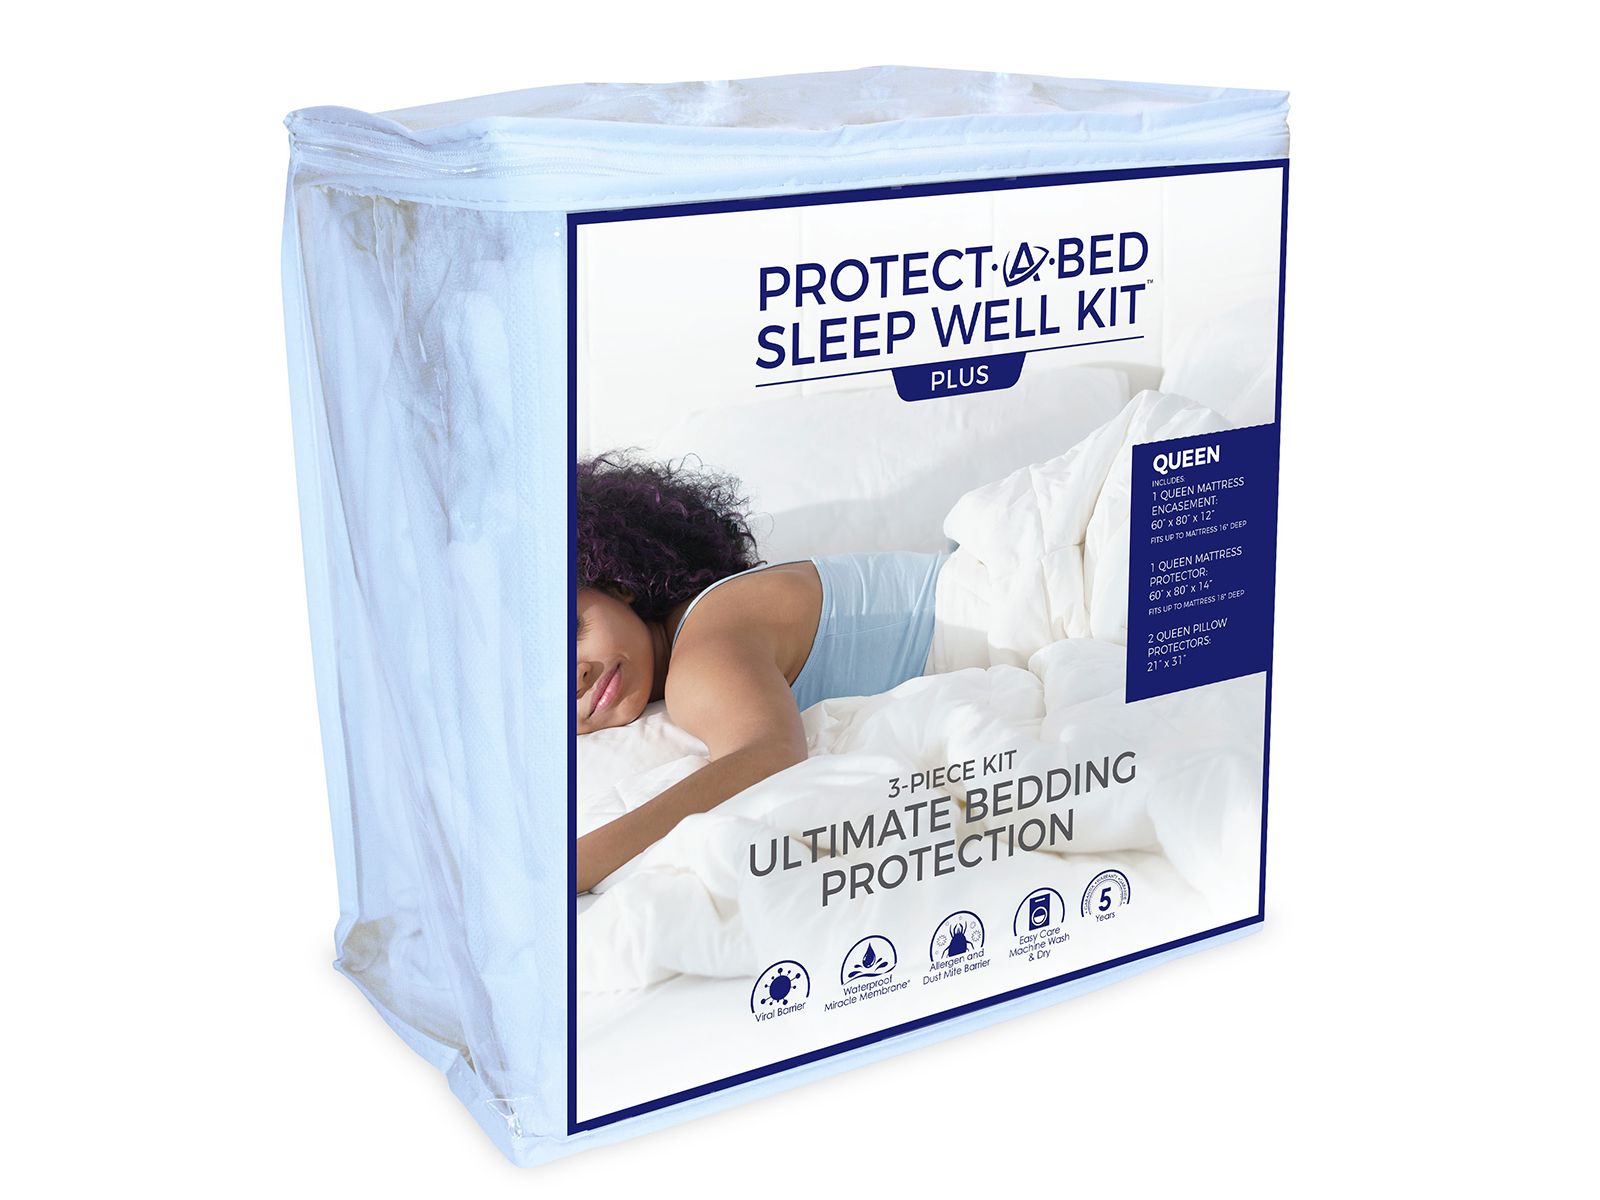 Protect-A-Bed King Sleep Well Kit